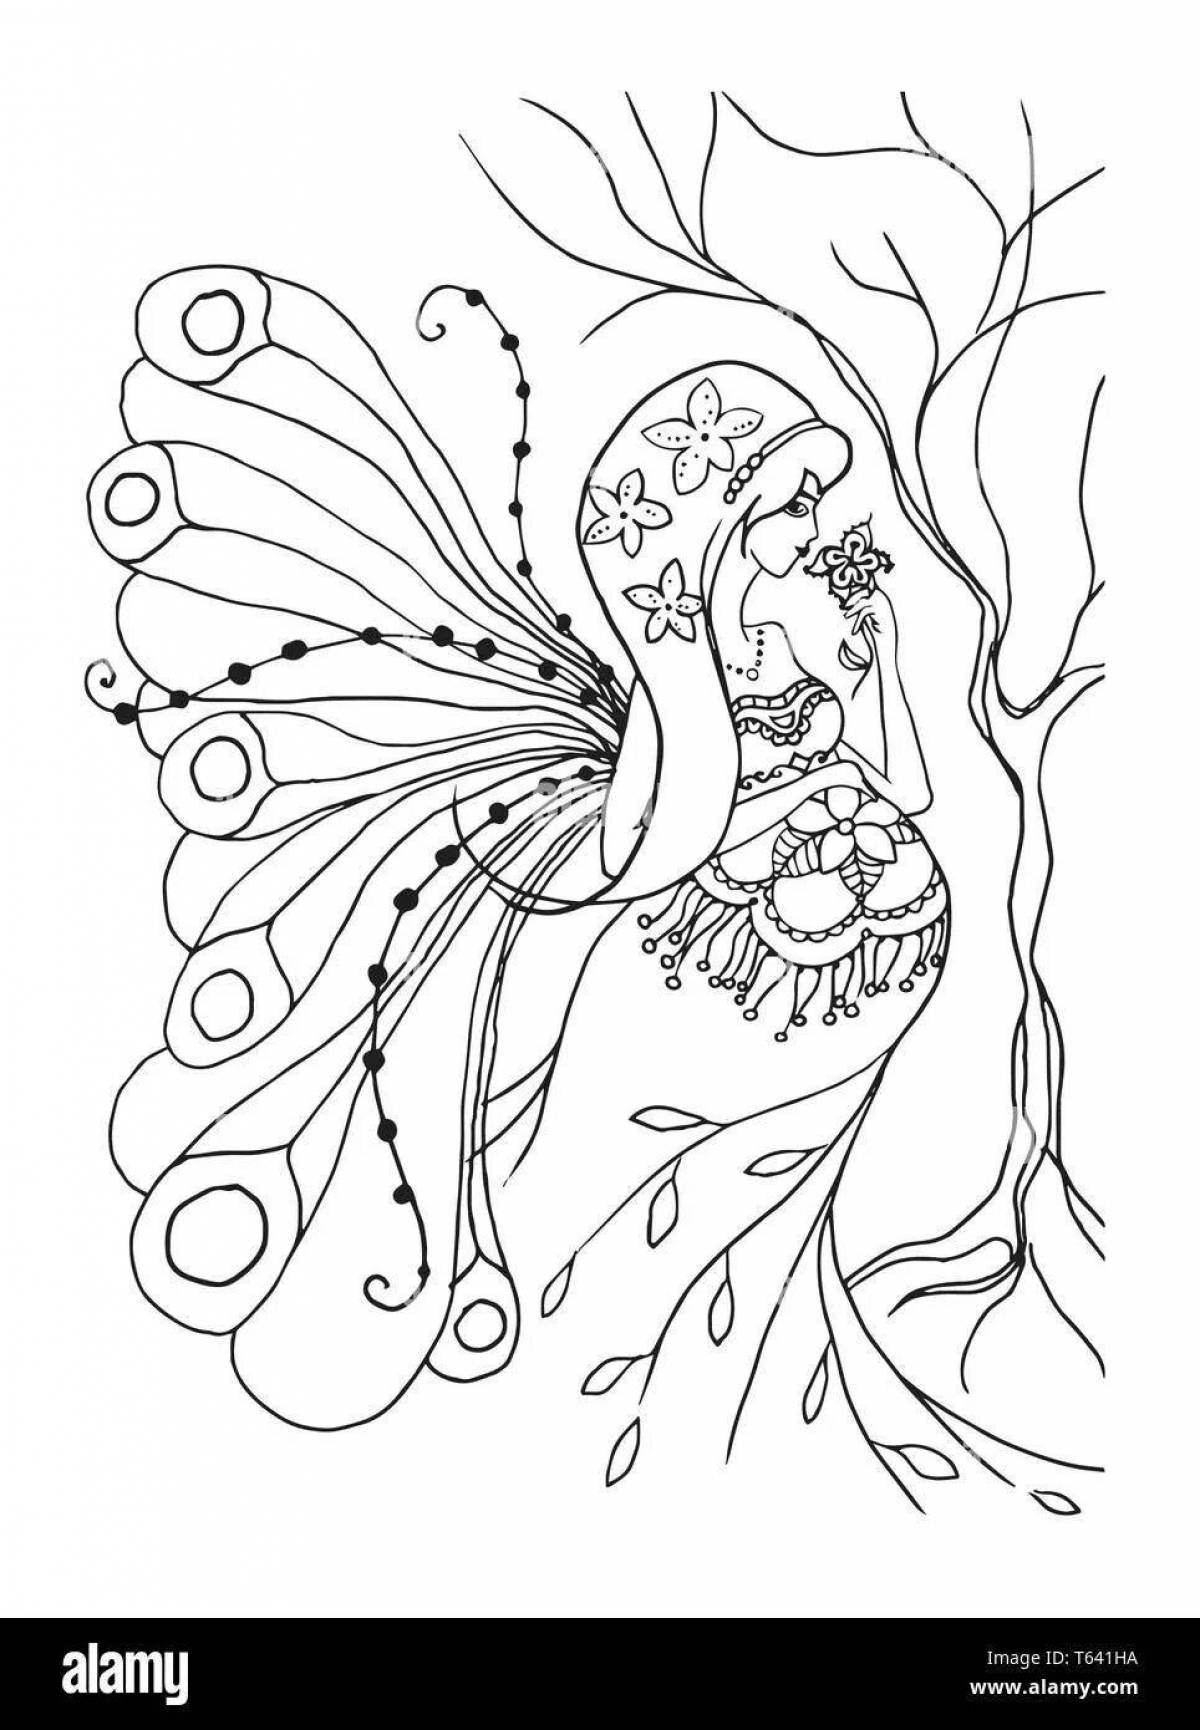 Consolation maternity coloring book